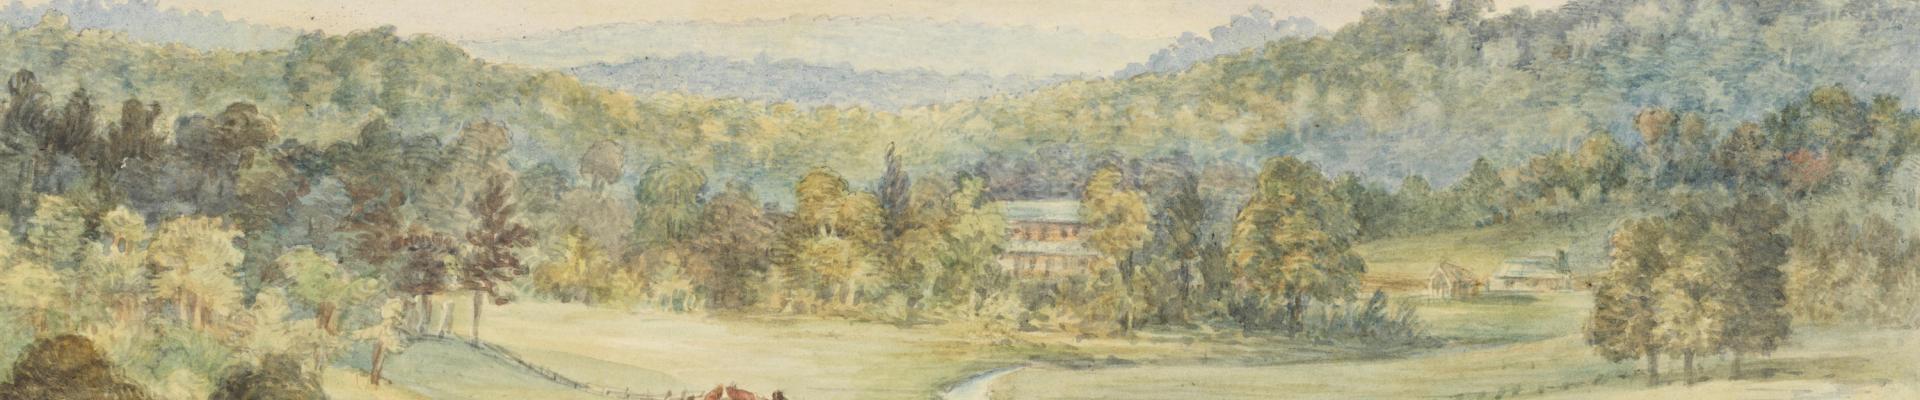 Detail from View at Oldbury, c 1826, by Charlotte Atkinson